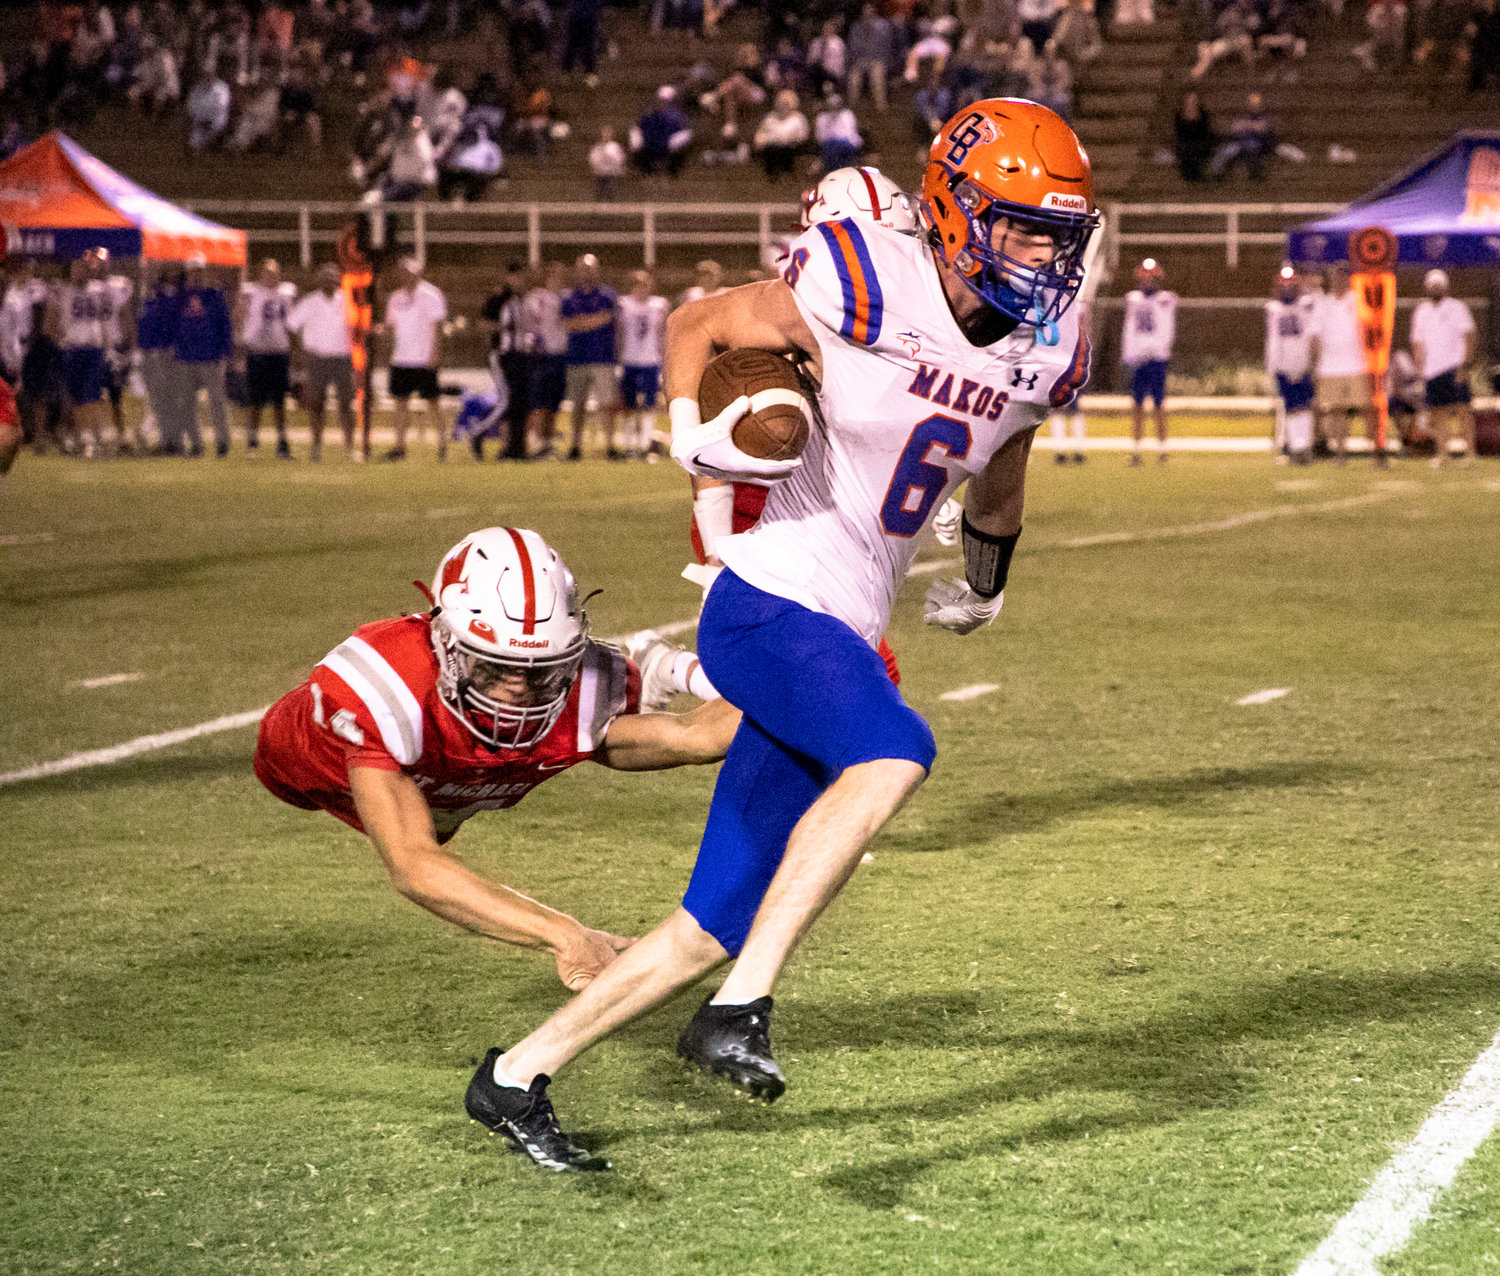 Orange Beach senior Will Reddell sheds a St. Michael defender and looks upfield on a big second-half gain during the Makos’ region contest against St. Michael Thursday on the road. Reddell caught three receiving touchdowns from quarterback Cash Turner on the night.